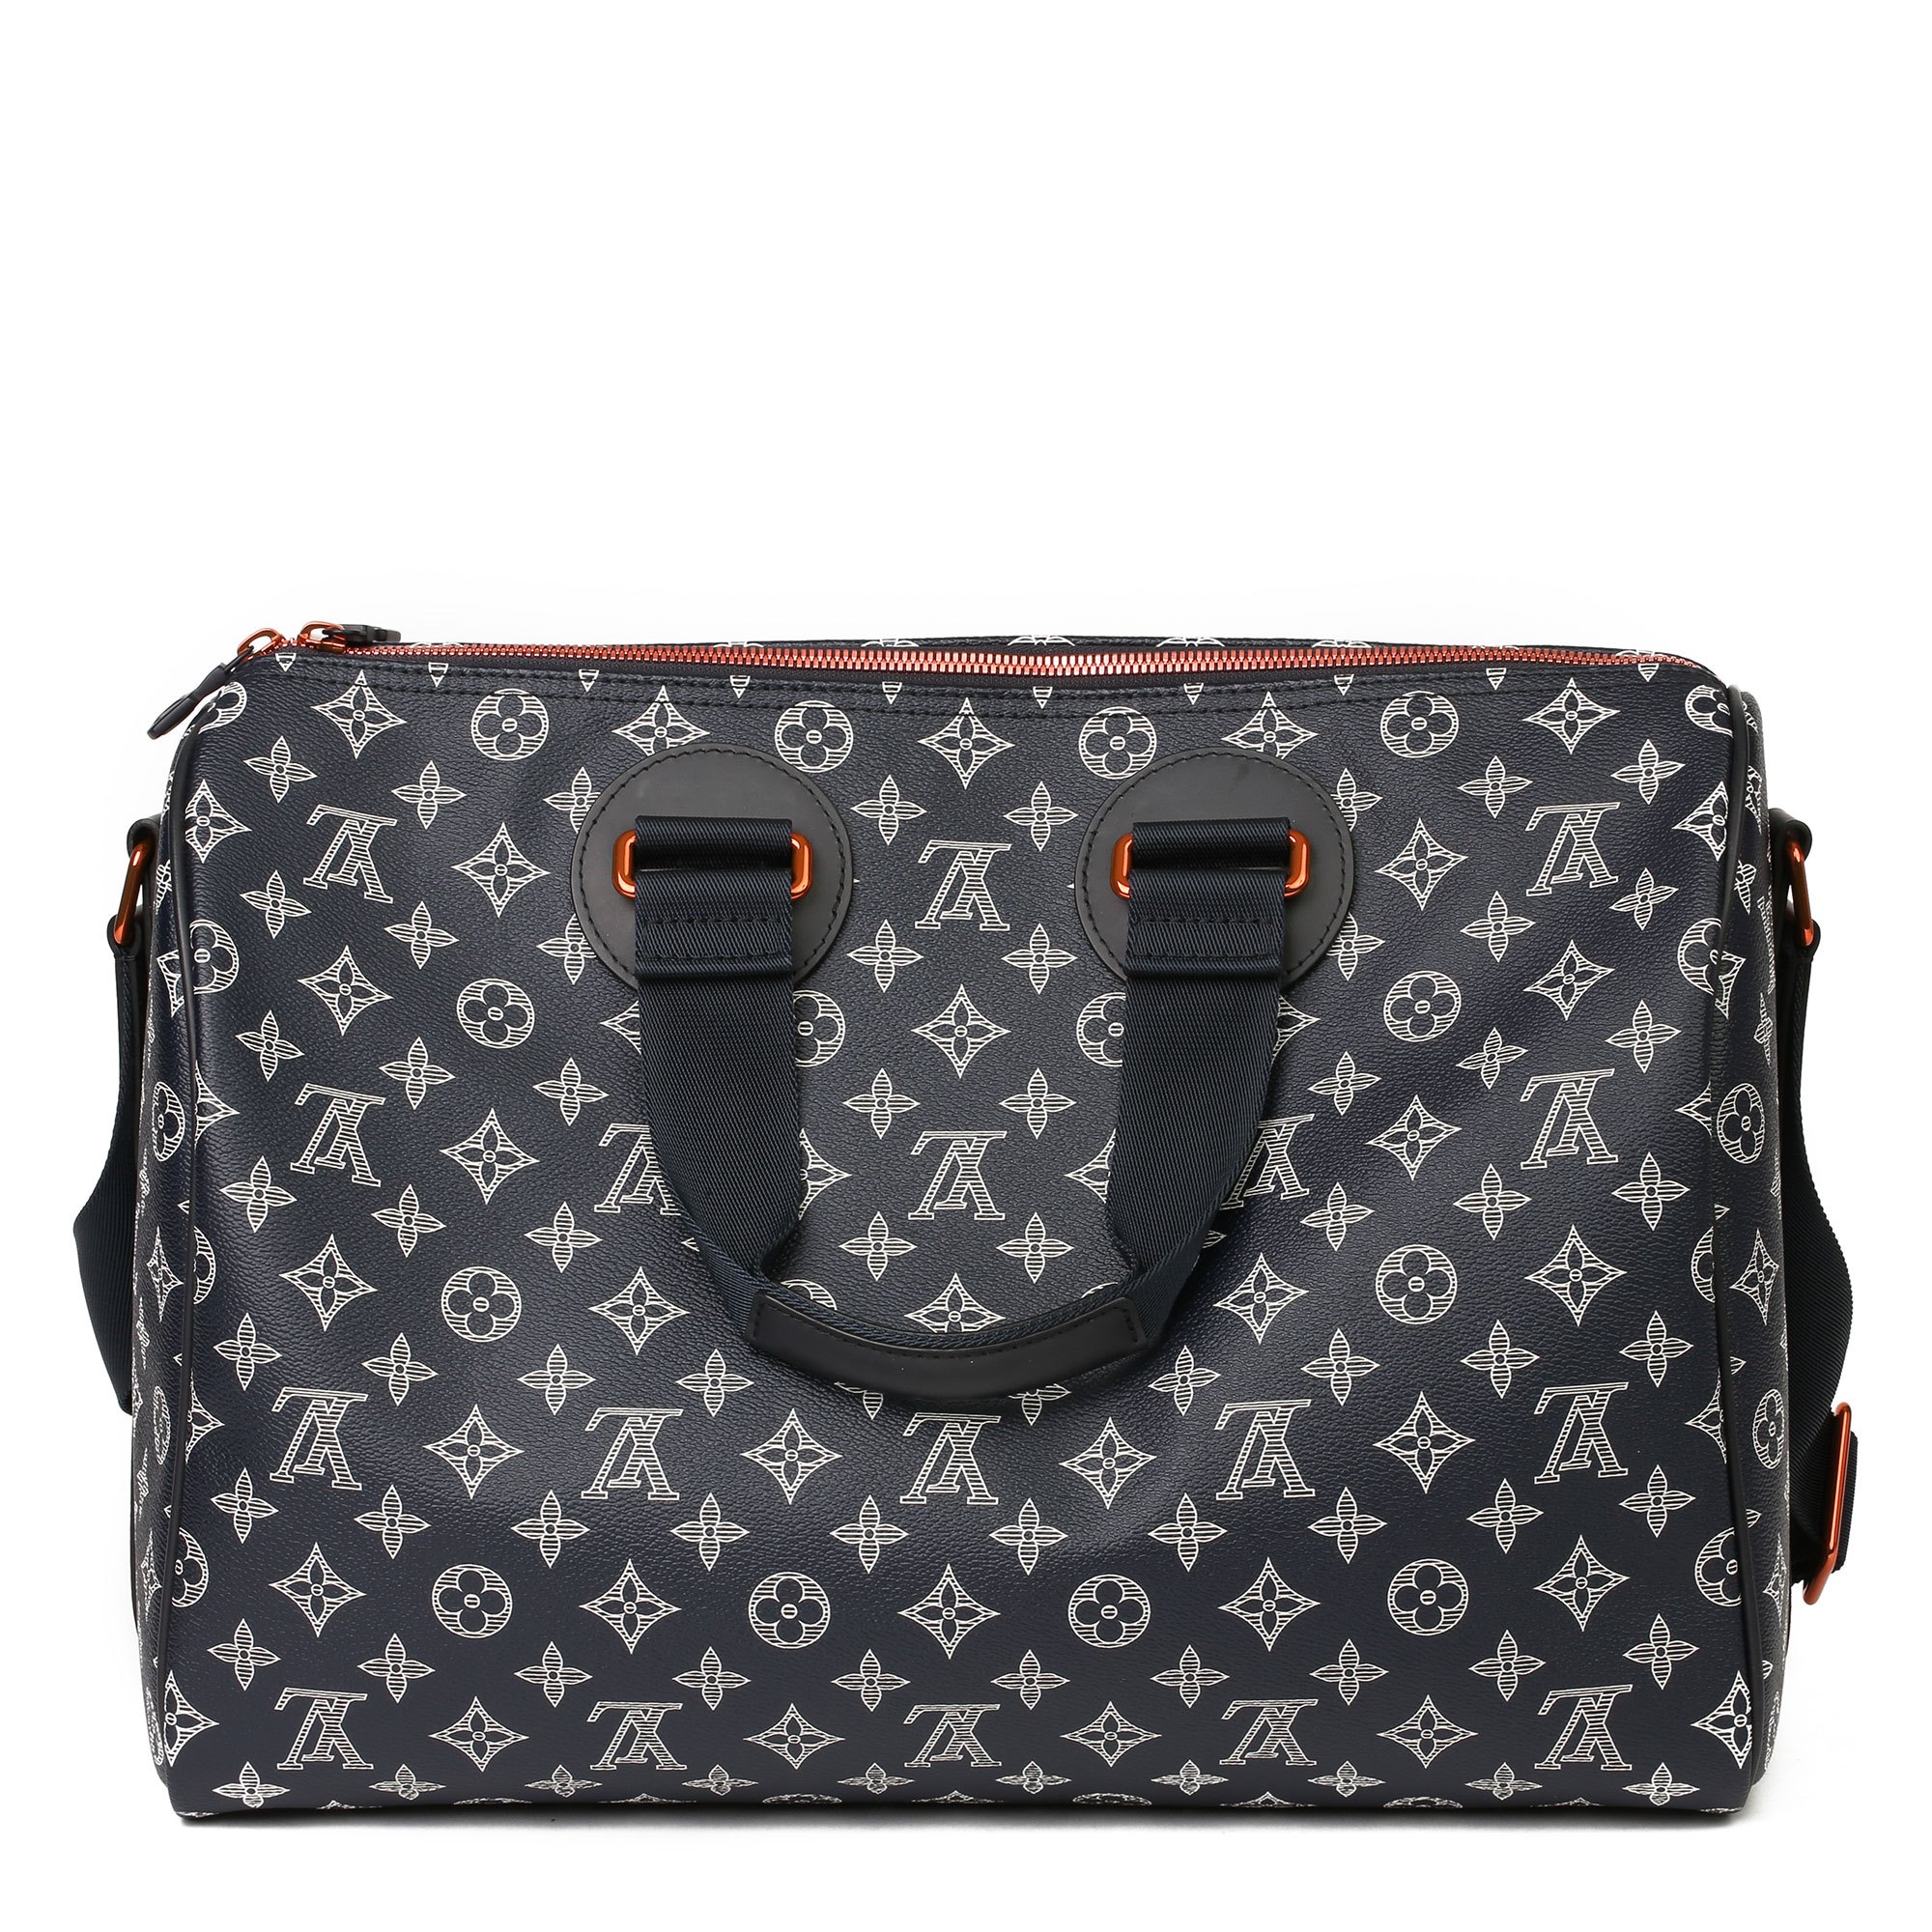 Navy Pacific Eclipse Monogram Coated Canvas & Calfskin Leather Upside Down  Speedy 40 Bandoulière